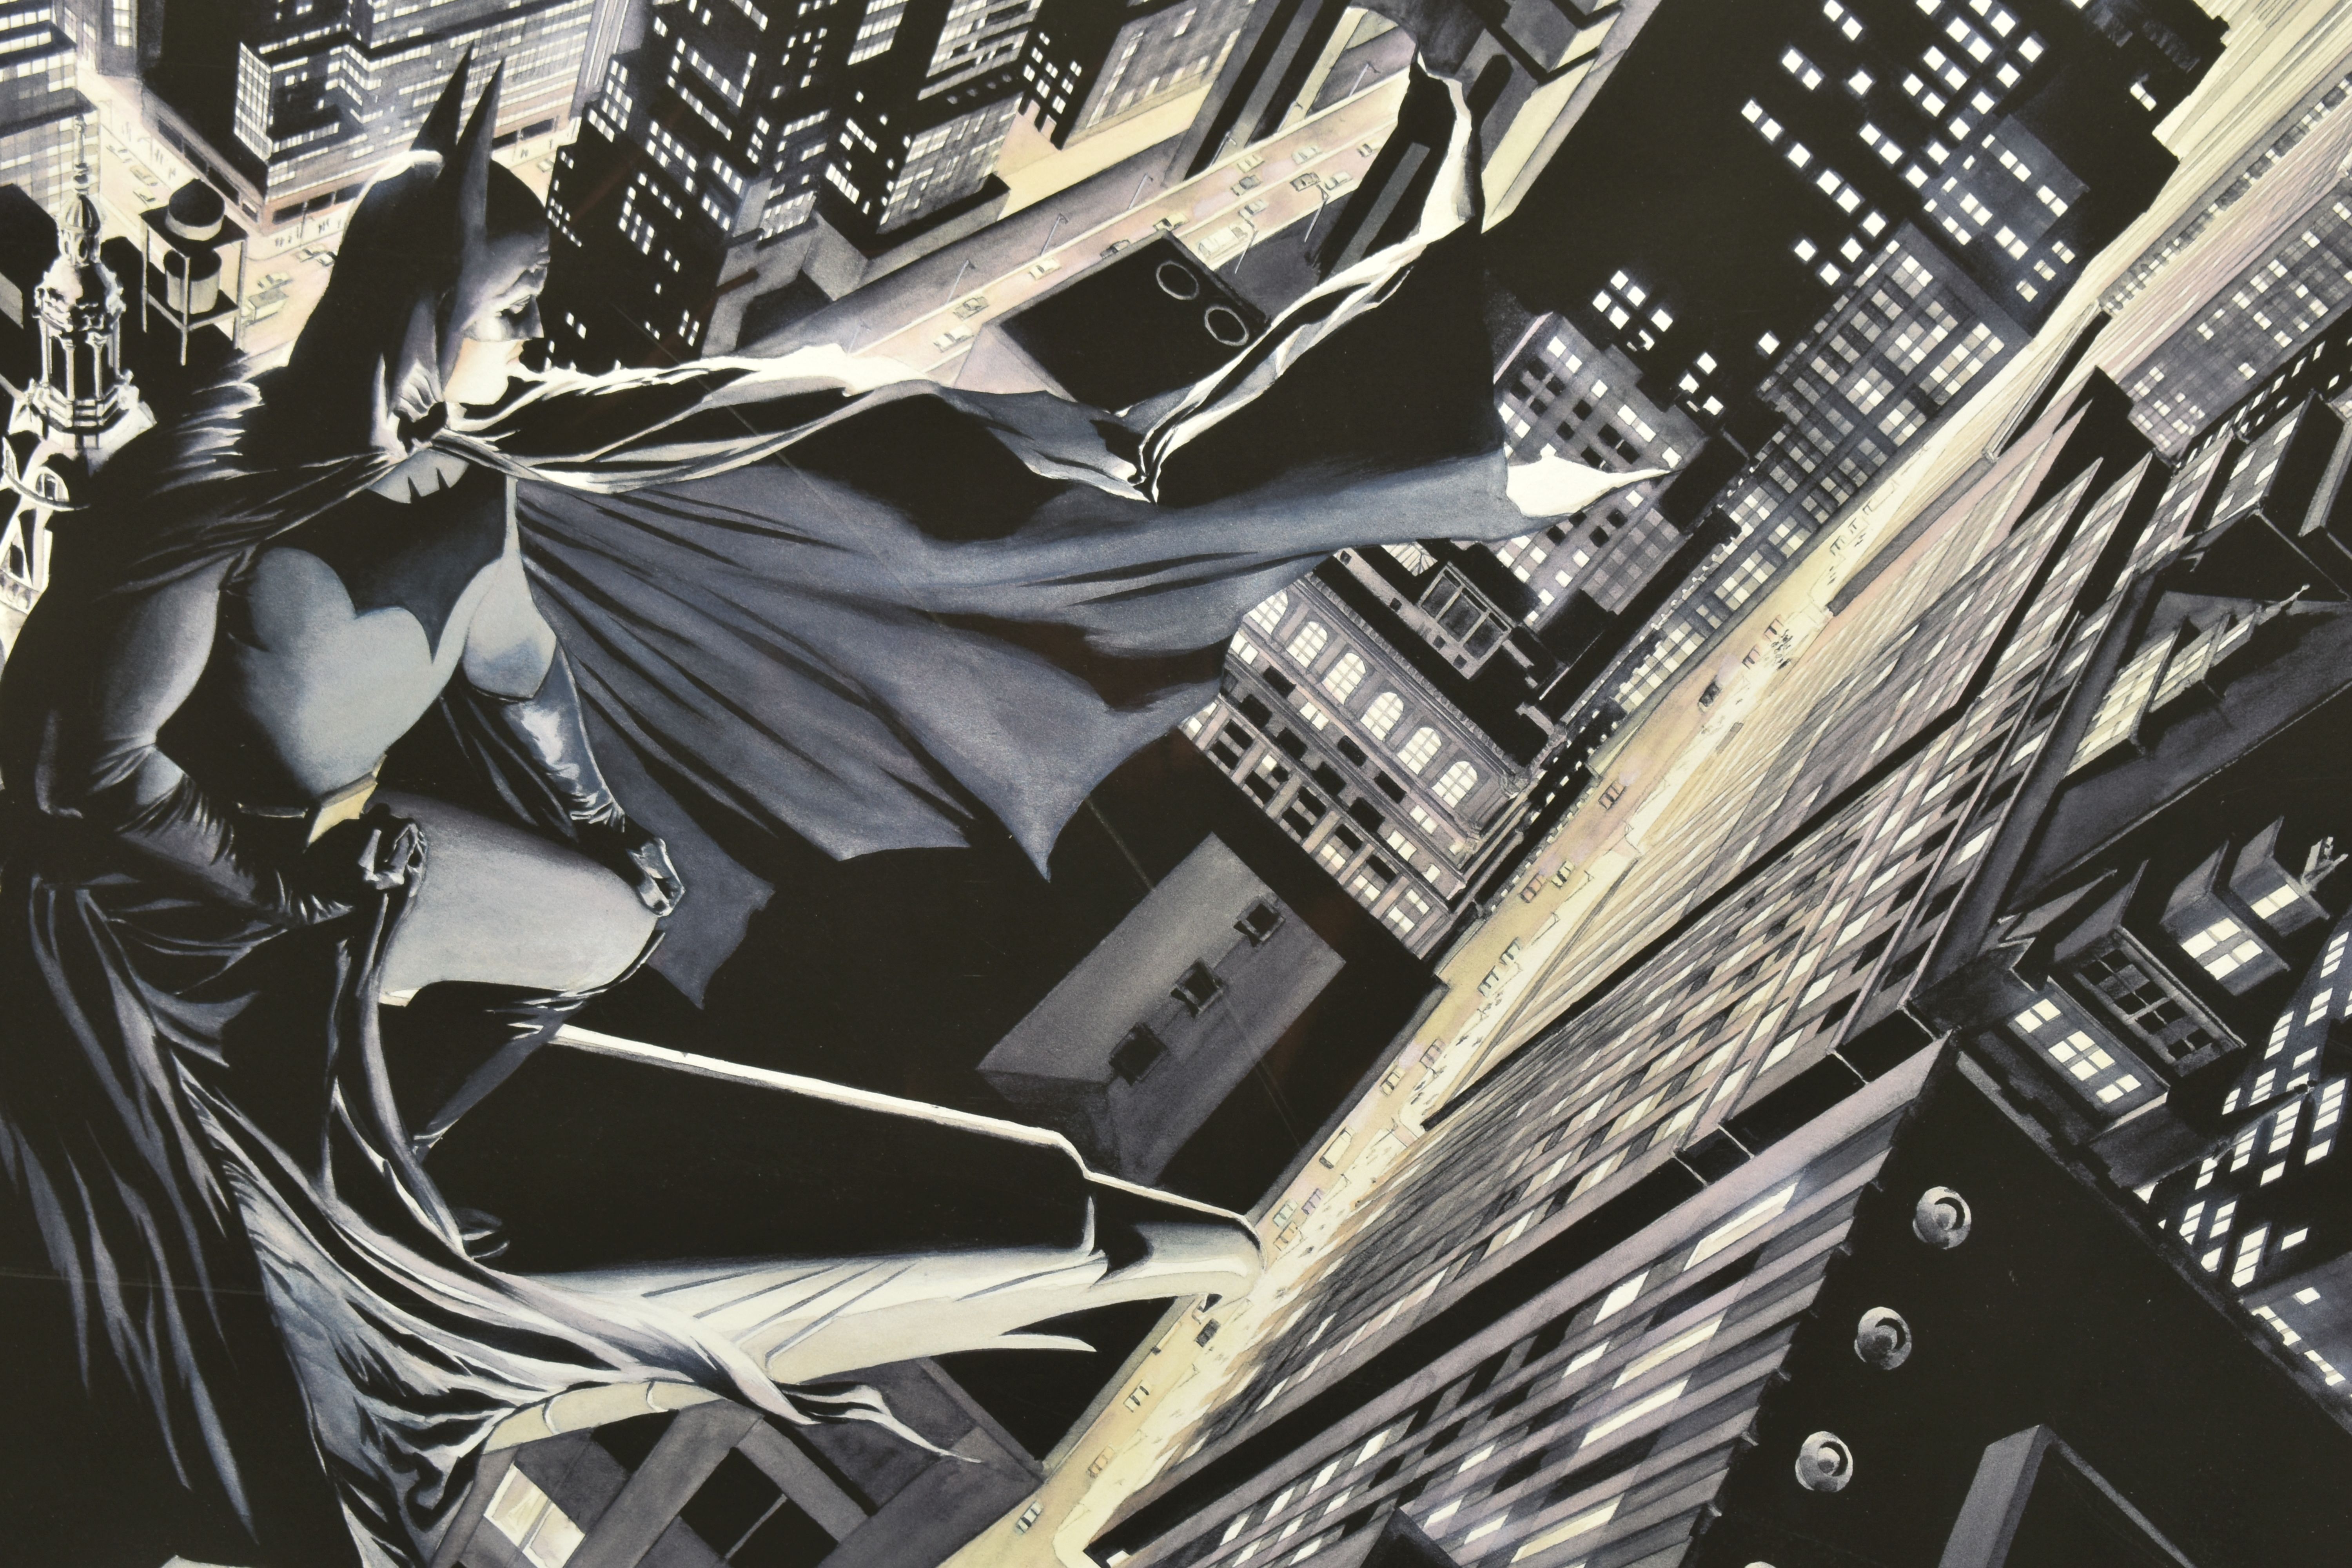 ALEX ROSS FOR DC COMICS (AMERICAN CONTEMPORARY) 'BATMAN: KNIGHT OVER GOTHAM' a signed limited - Image 2 of 6